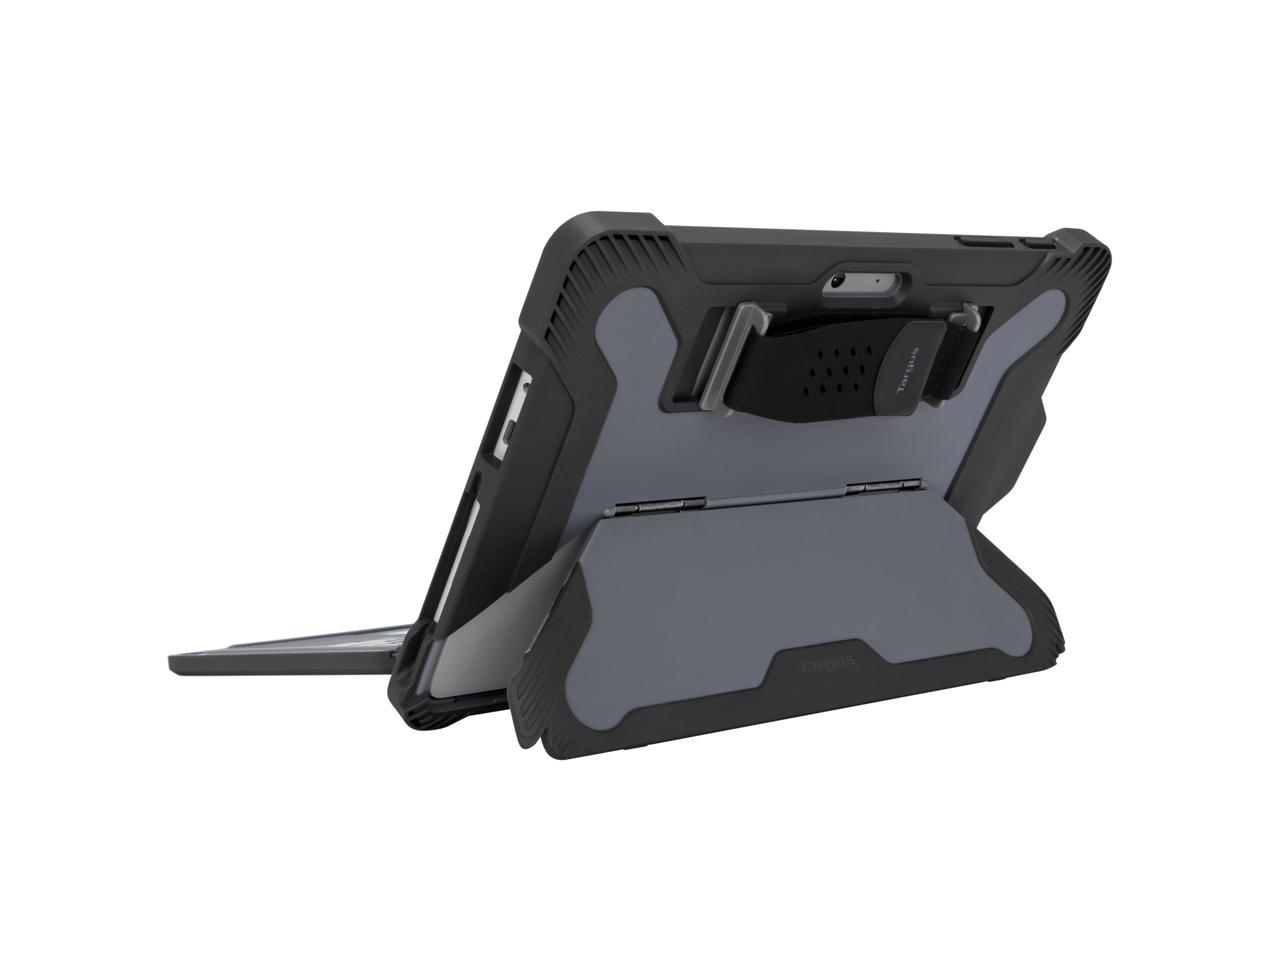 Targus® SafePort Rugged MAX Case For 9.7" Microsoft® Surface Go Tablet, Black/Gray, THD491GL - image 5 of 5